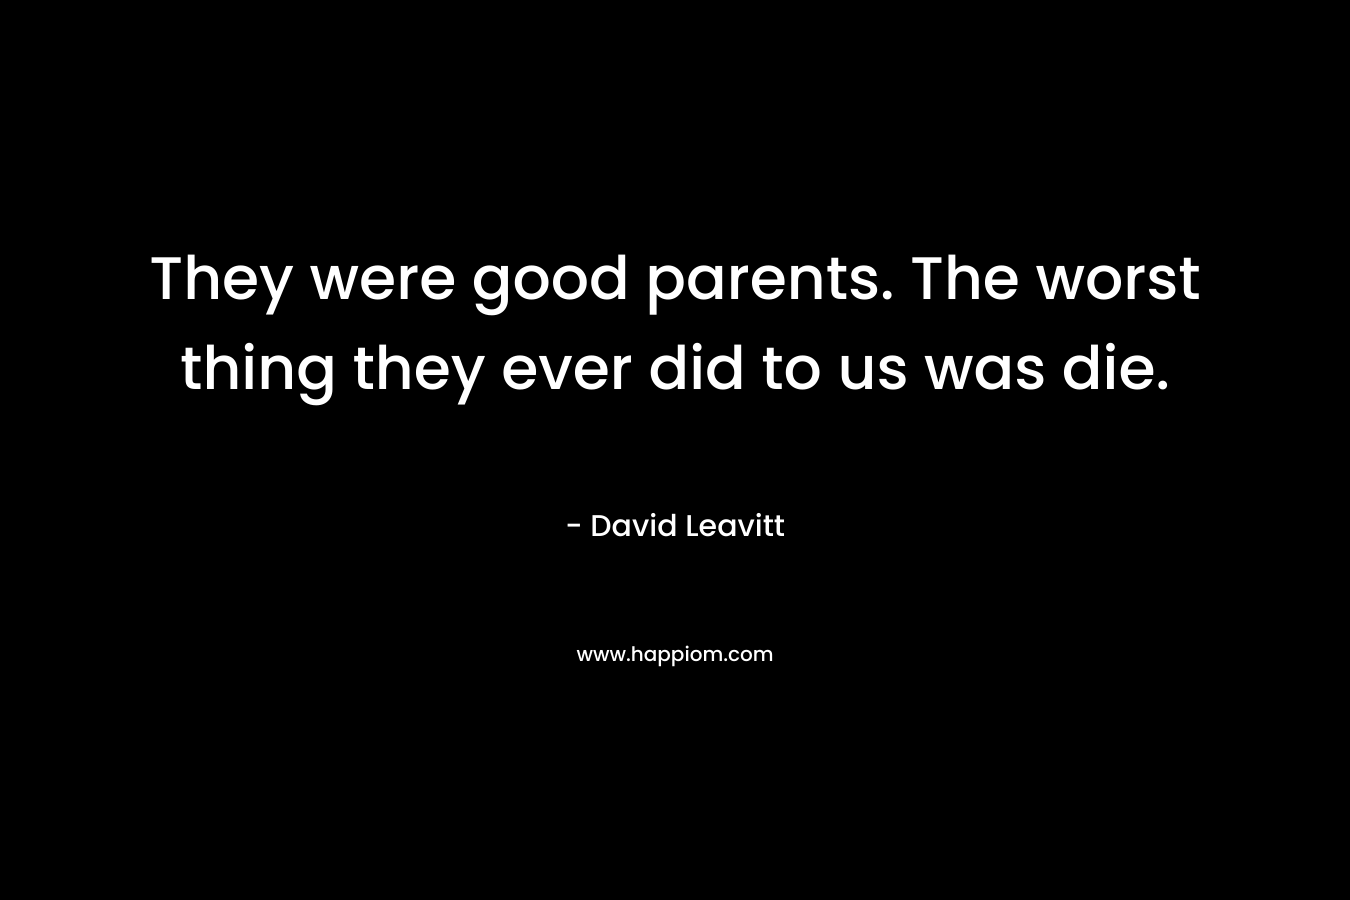 They were good parents. The worst thing they ever did to us was die.